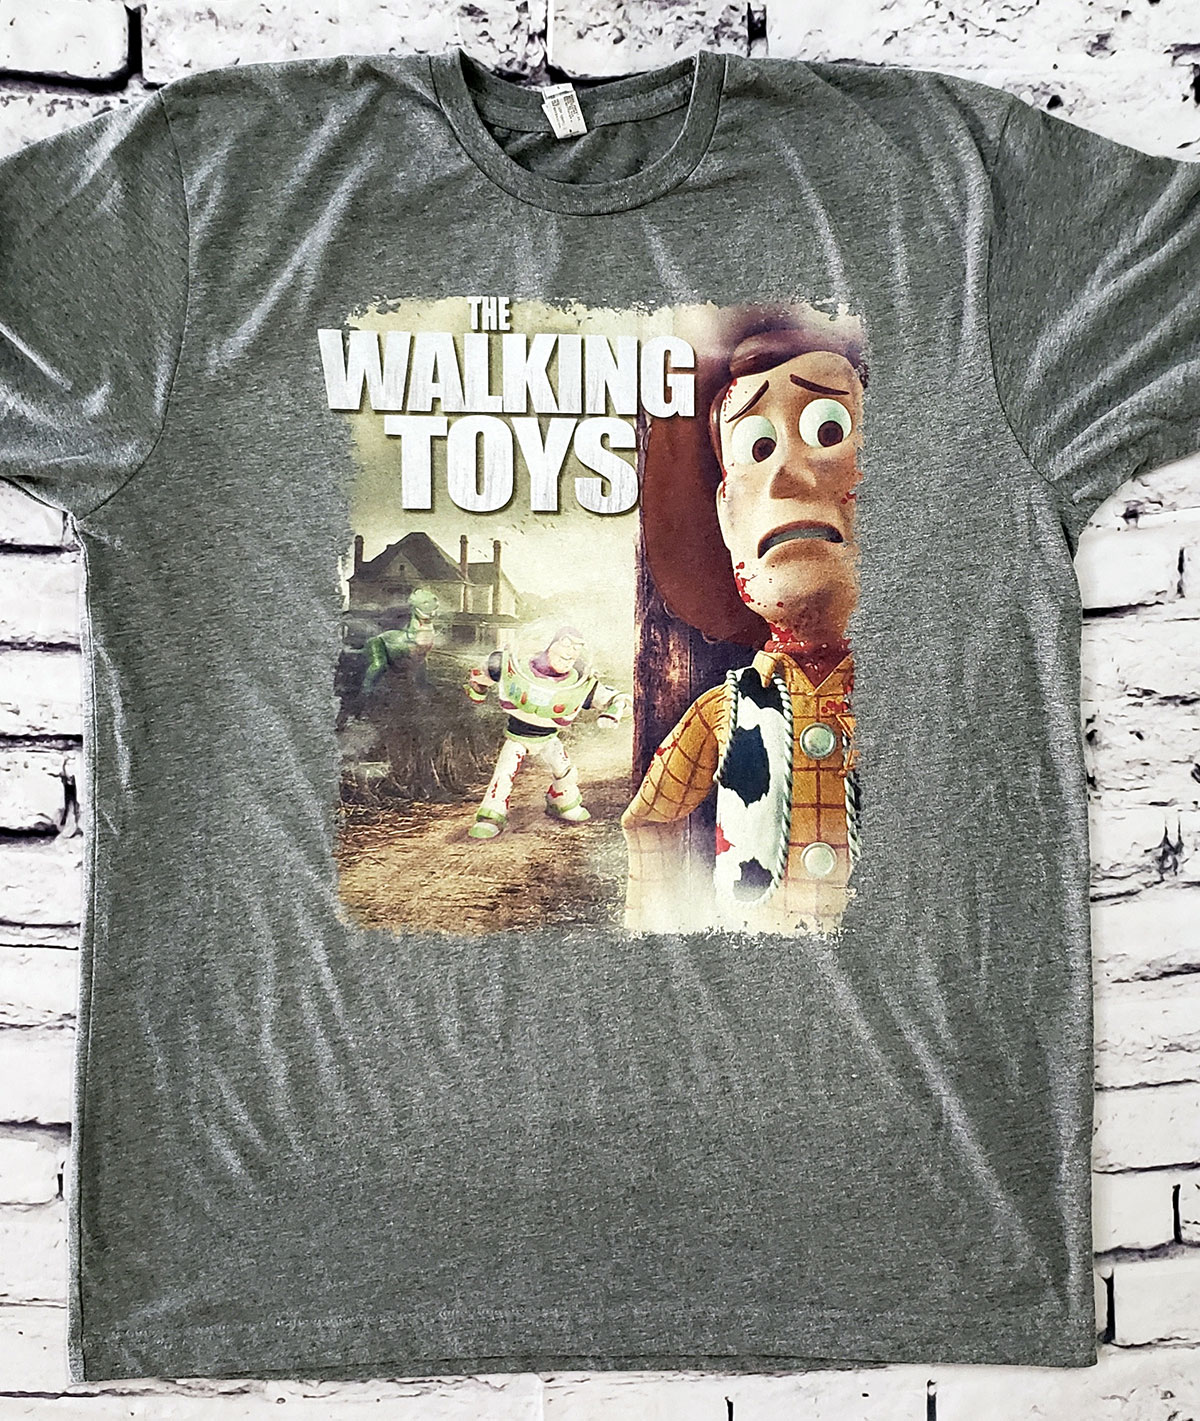 The Walking Toys Adult Meme Funny Parody of Toy Story Meets The Walking ...